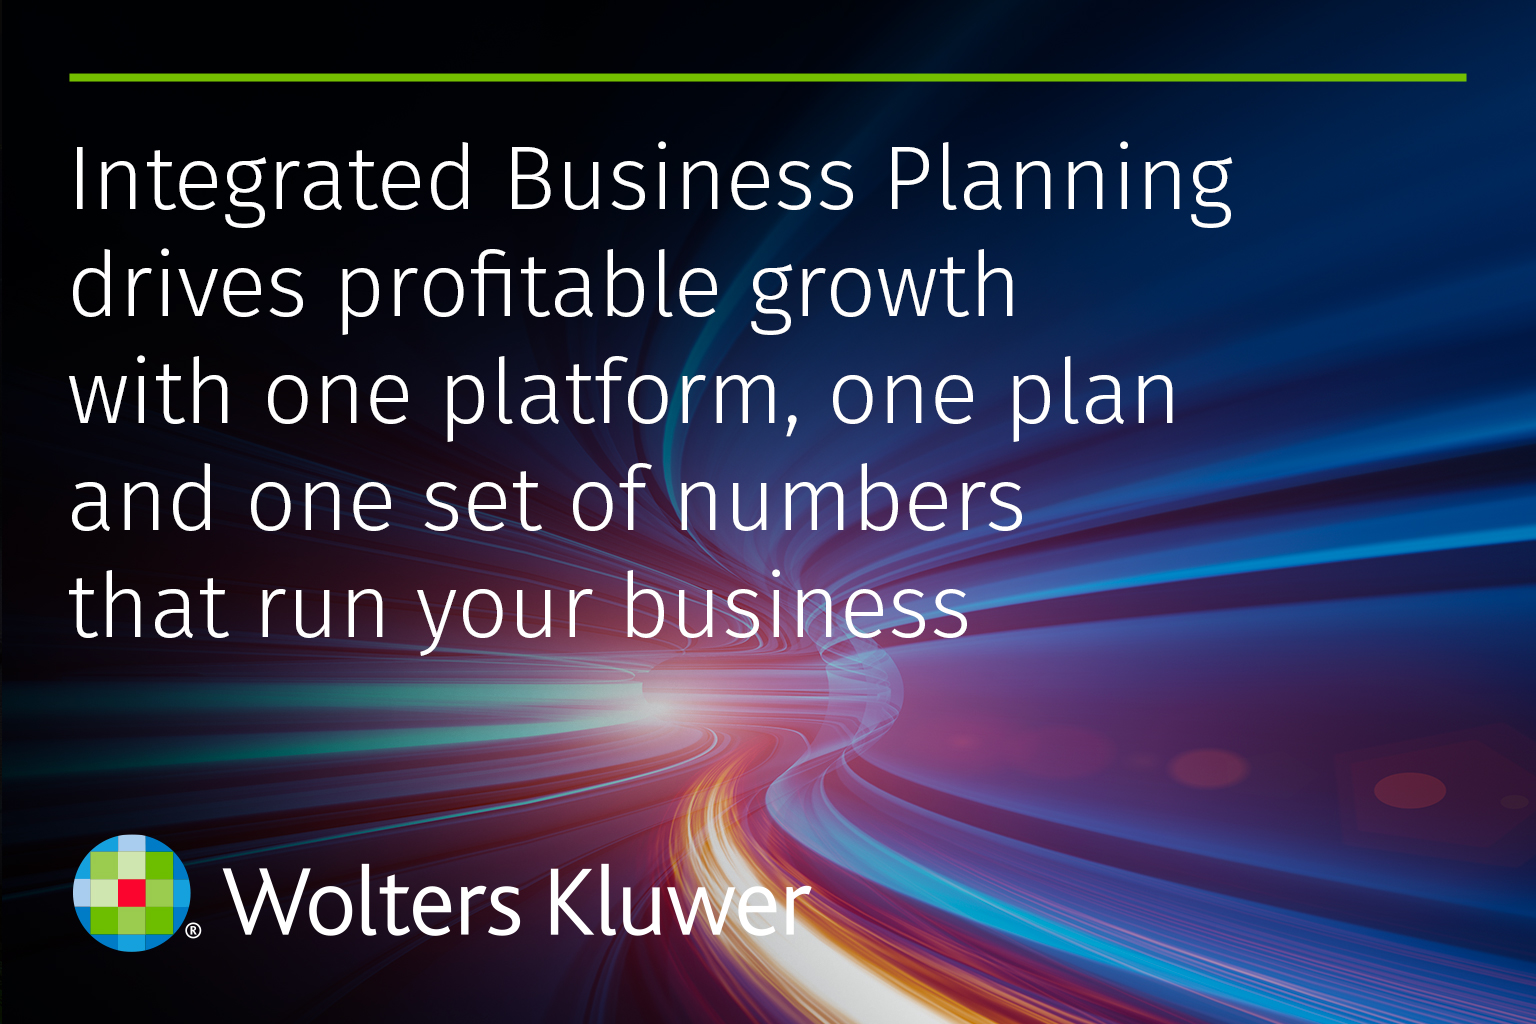 business planning images